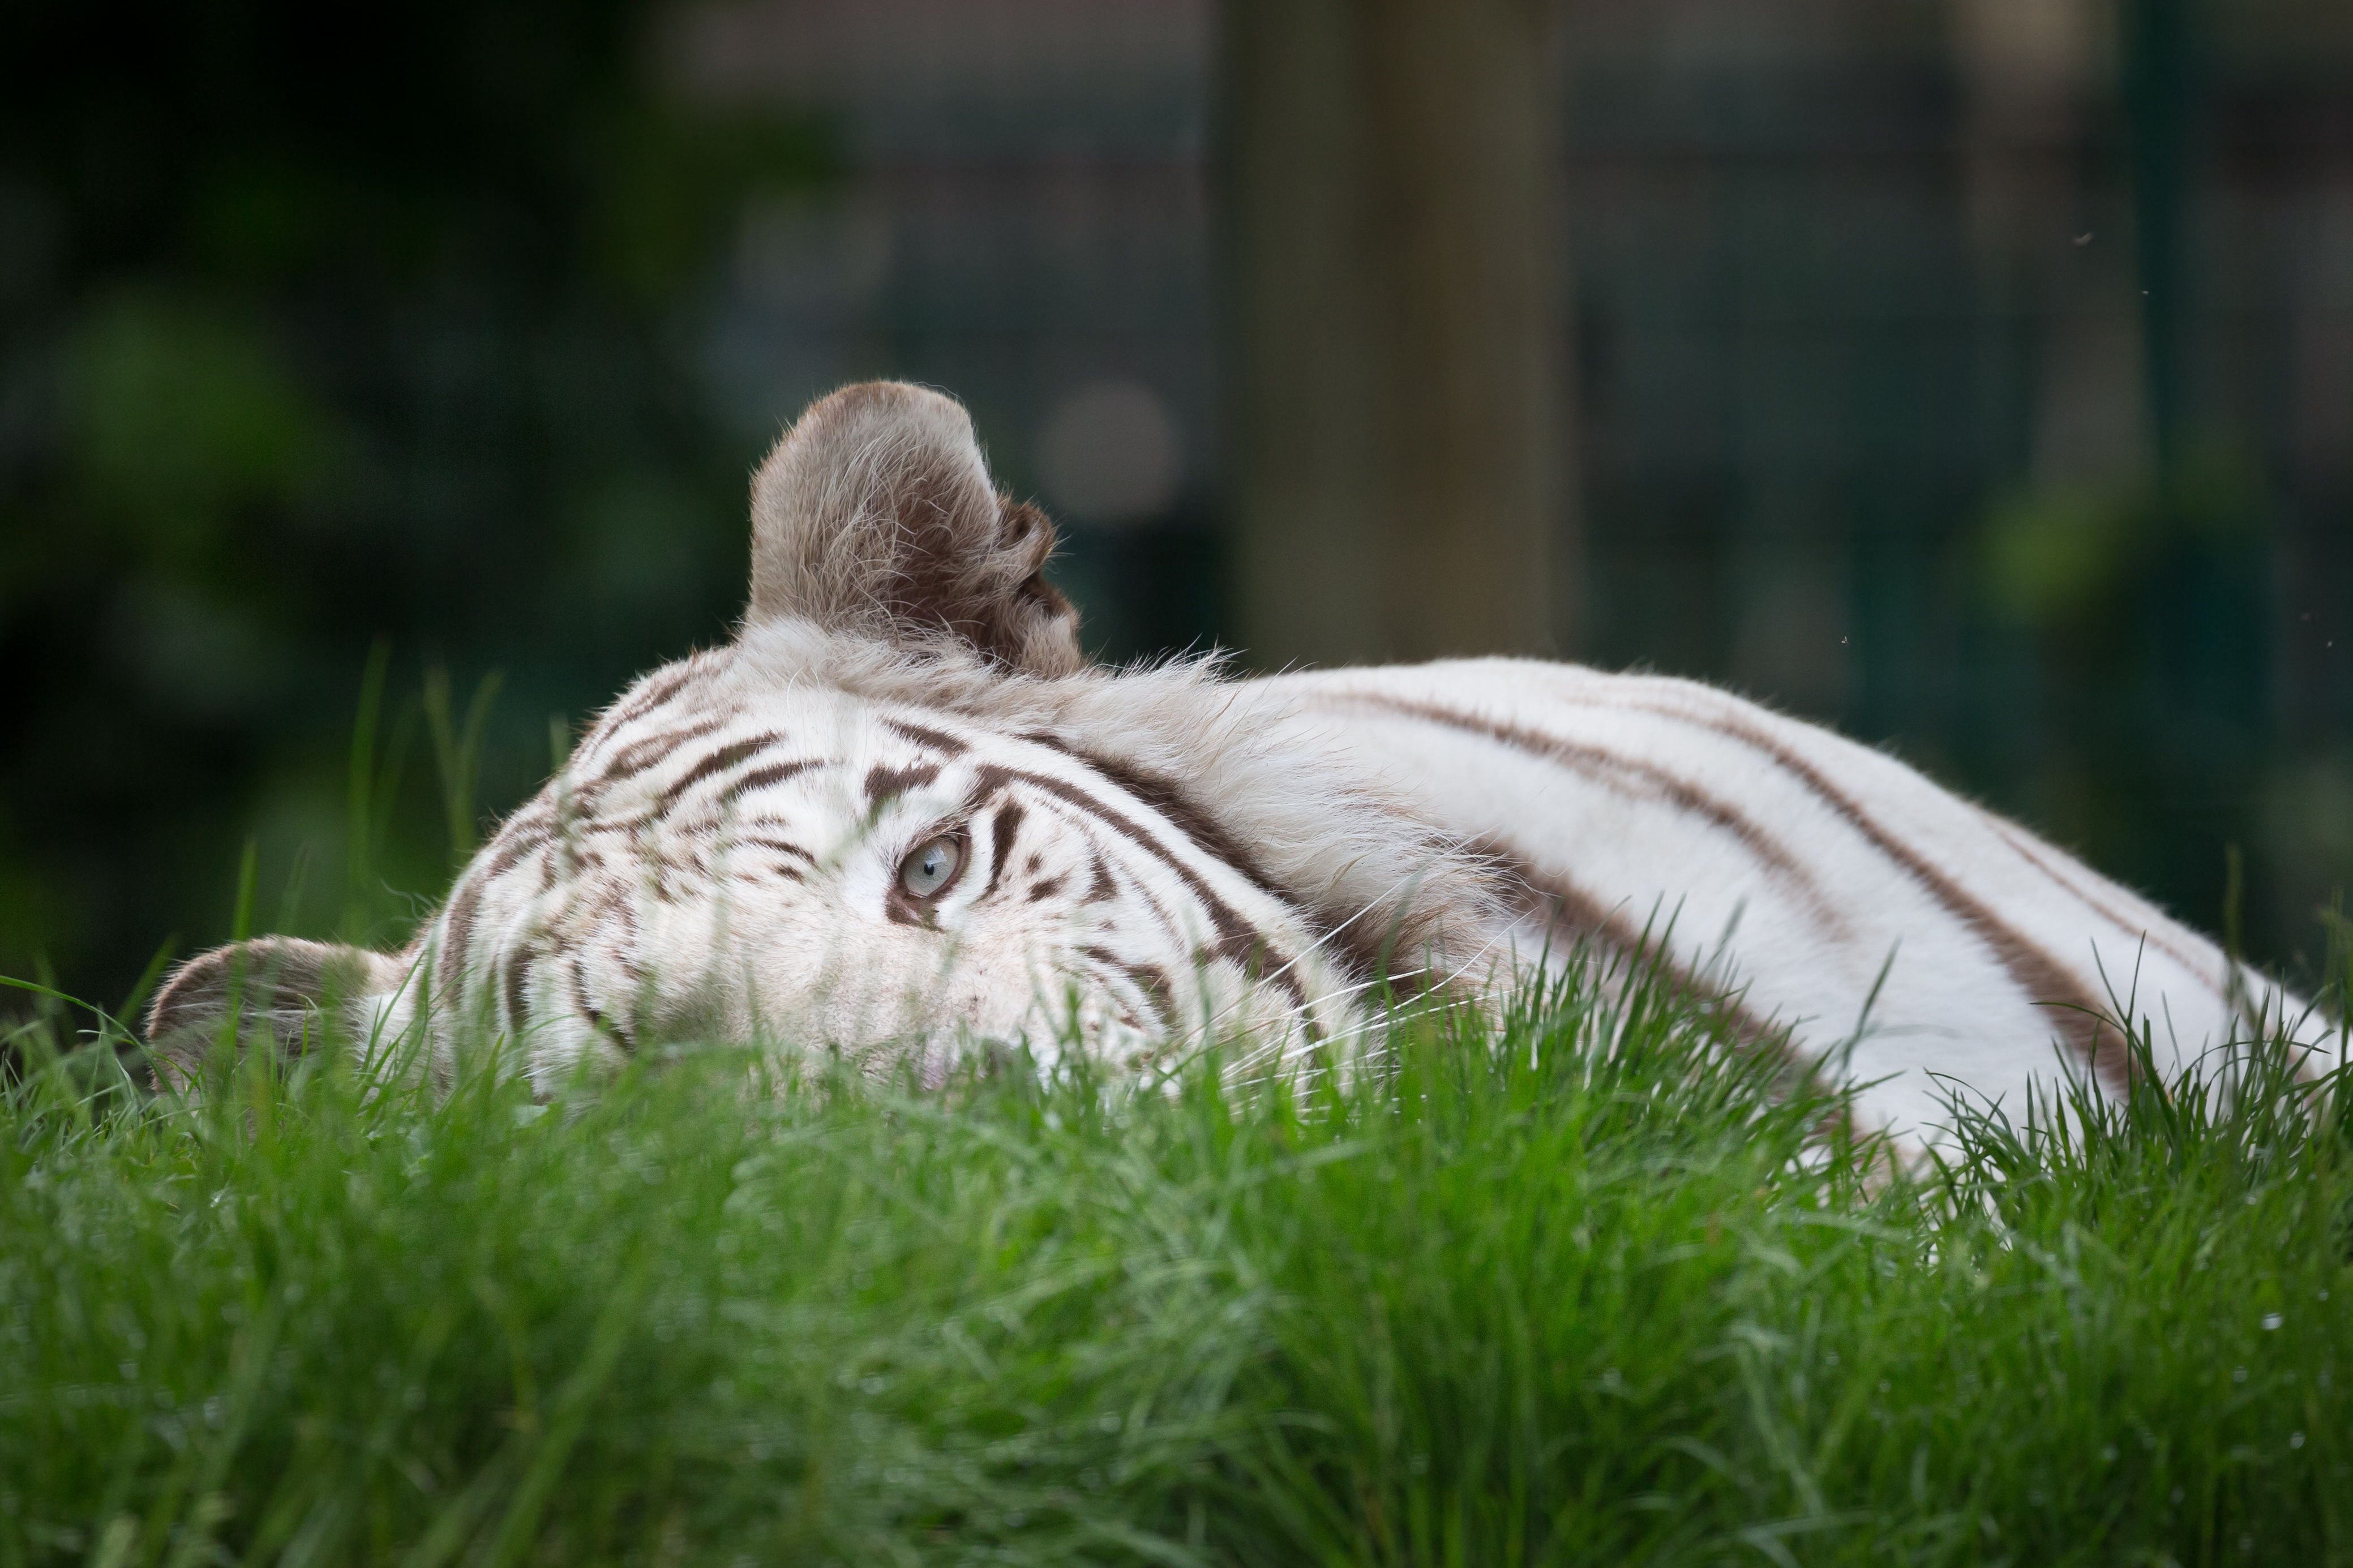 Free download wallpaper Cats, Grass, Tiger, Animal, White Tiger, Lying Down on your PC desktop